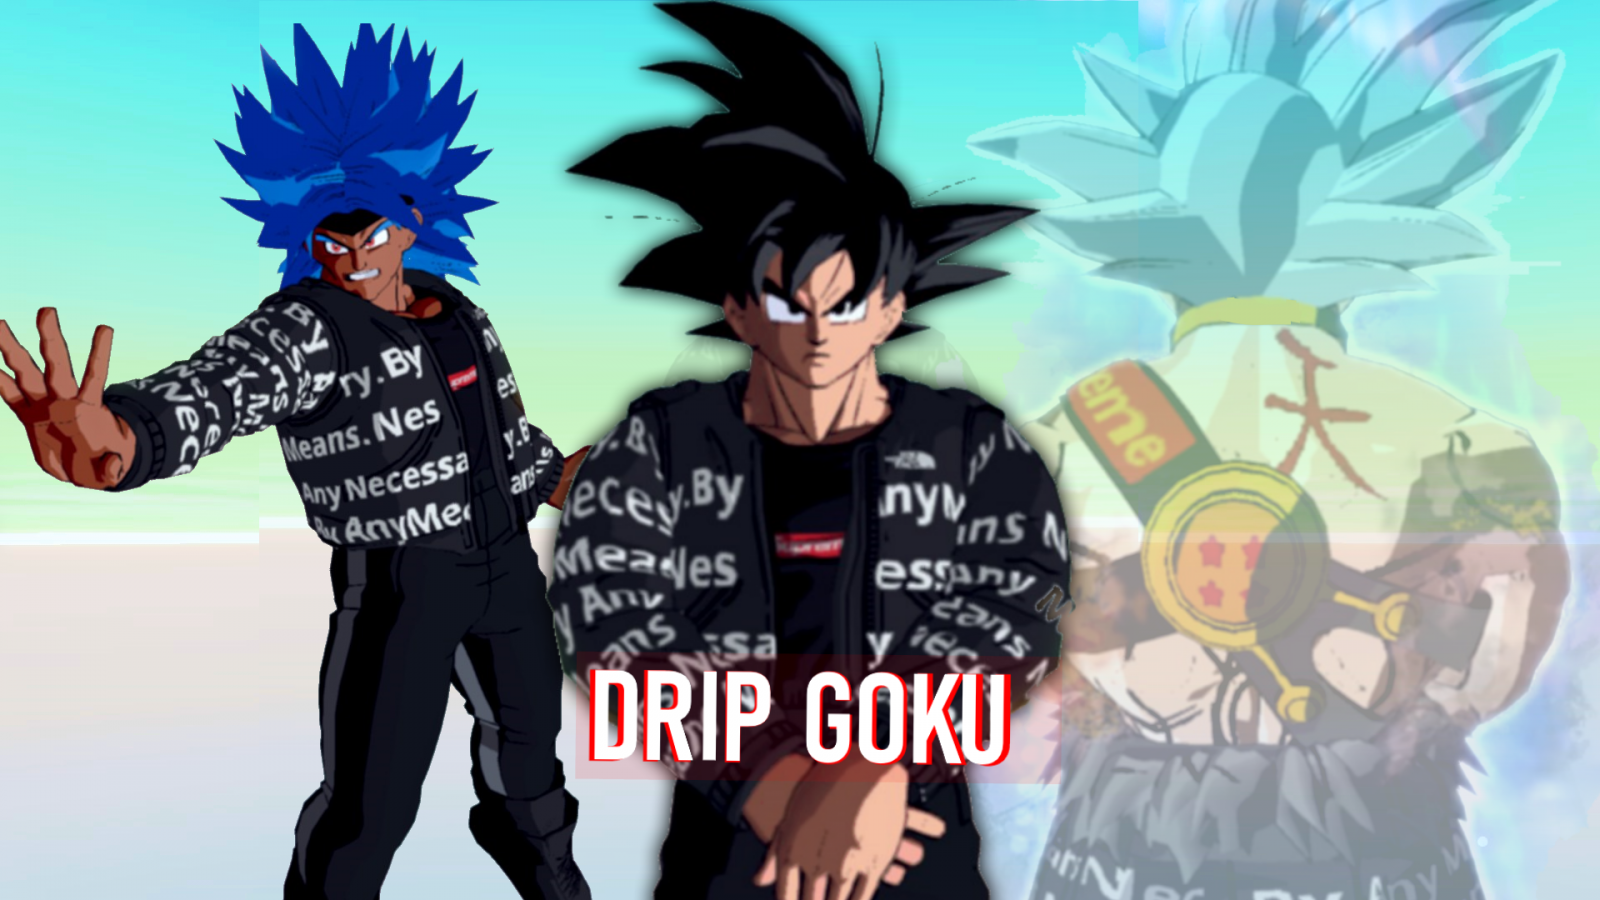 Also check out my drip Goku which has one HUM outfit.